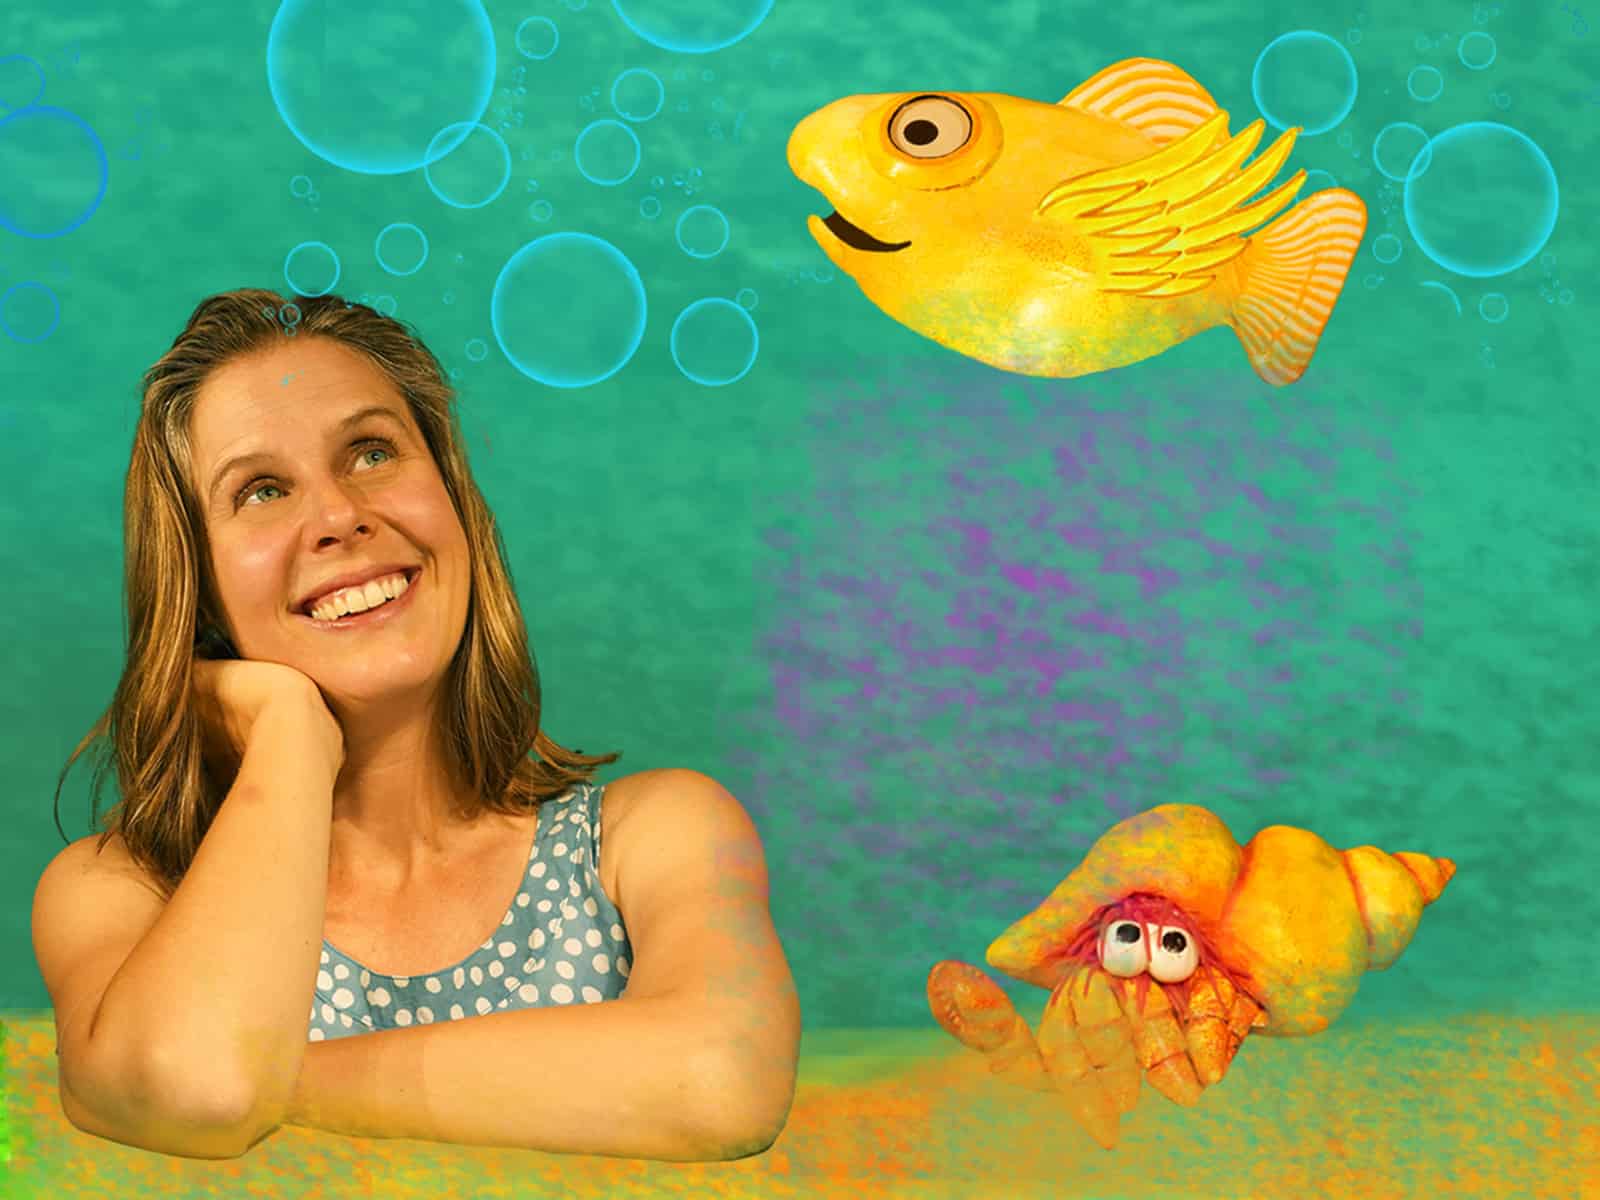 A blond woman leans on a beach. A hermit crab sits next to her and a yellow fish swims above her.